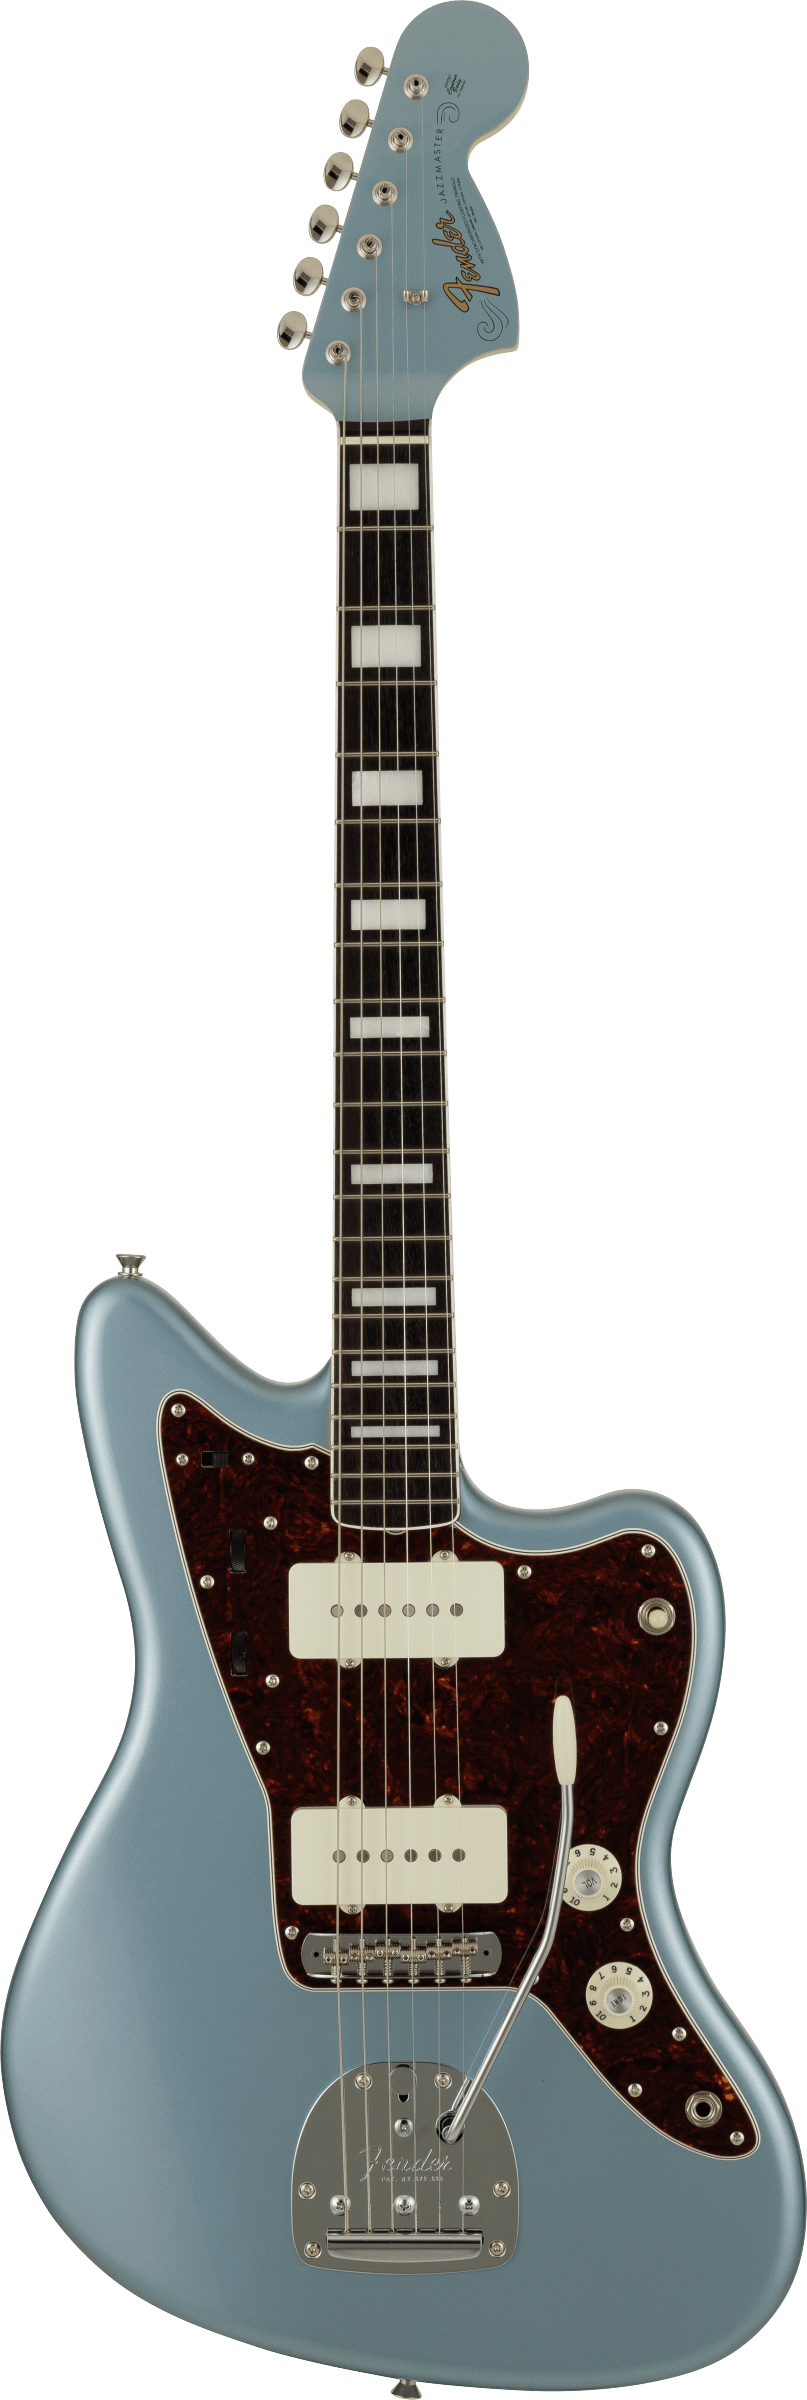 Traditiomal Late 60s' Jazzmaster IBM2023CollectionT